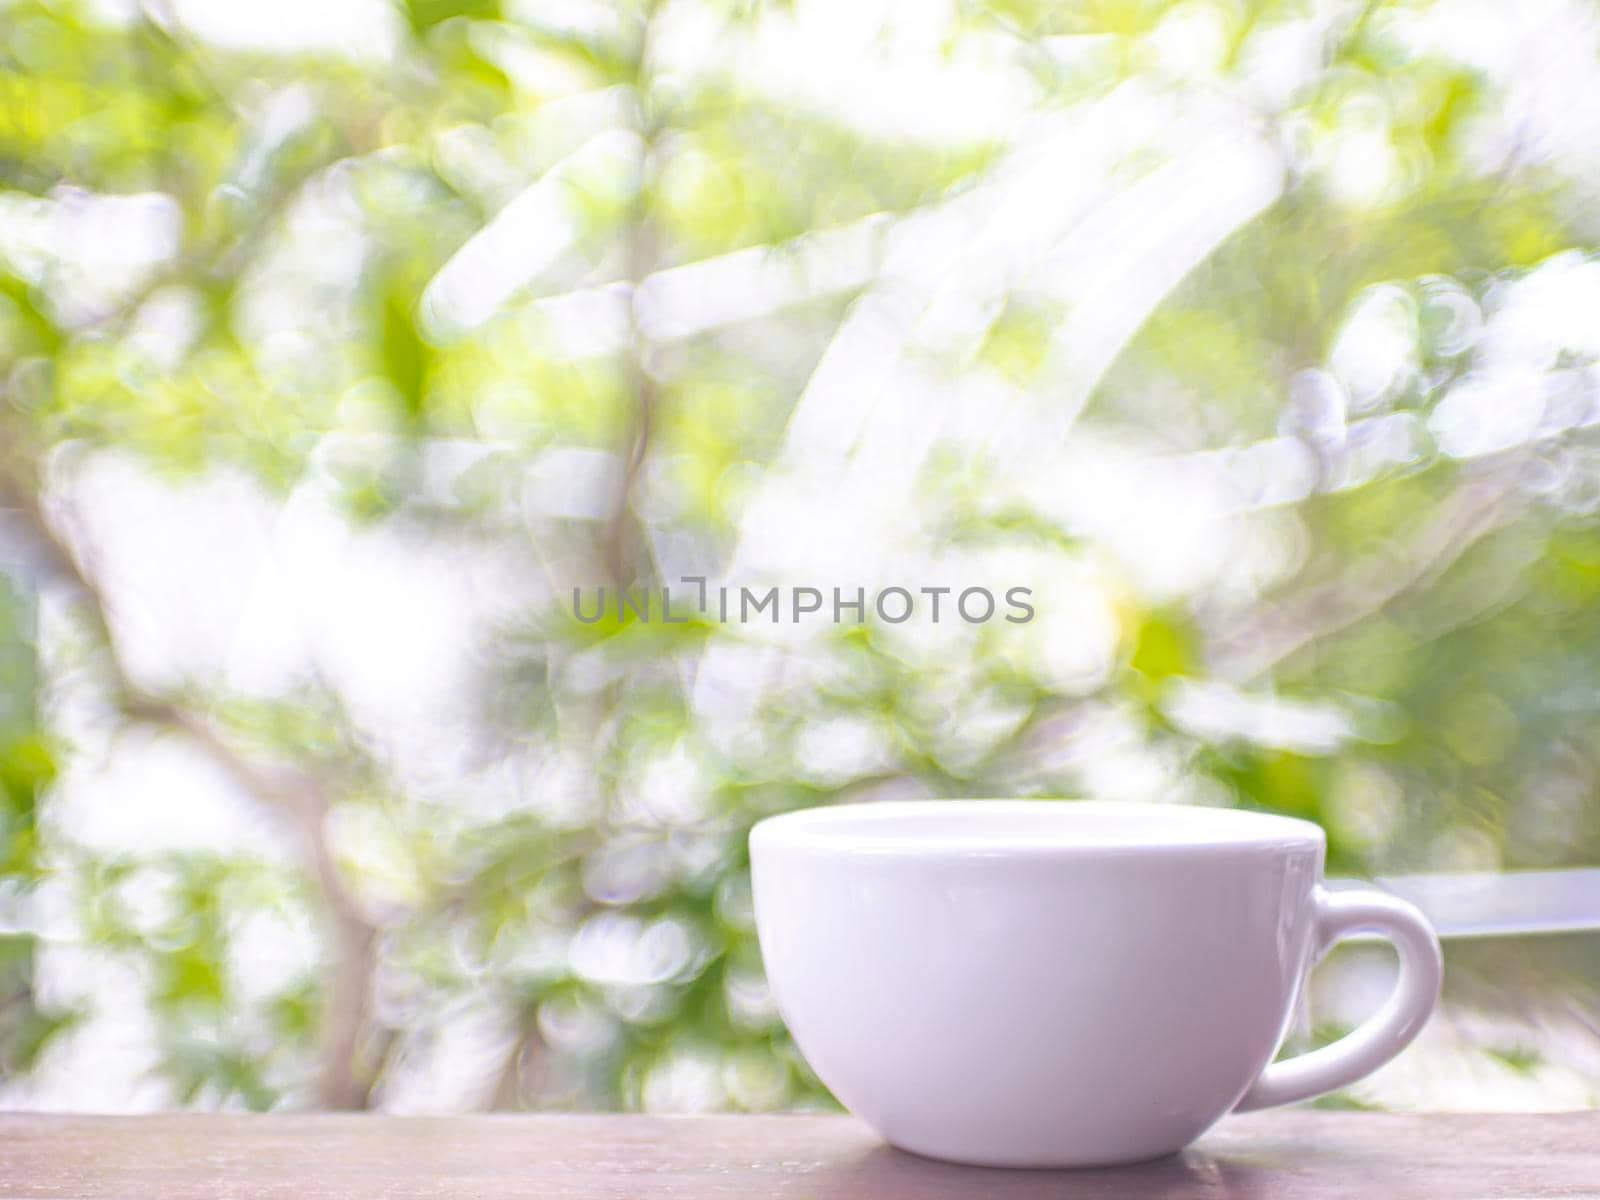 Blank White Mug Mockup on wooden table. Fresh Tree Branches with Green Leaves blur background